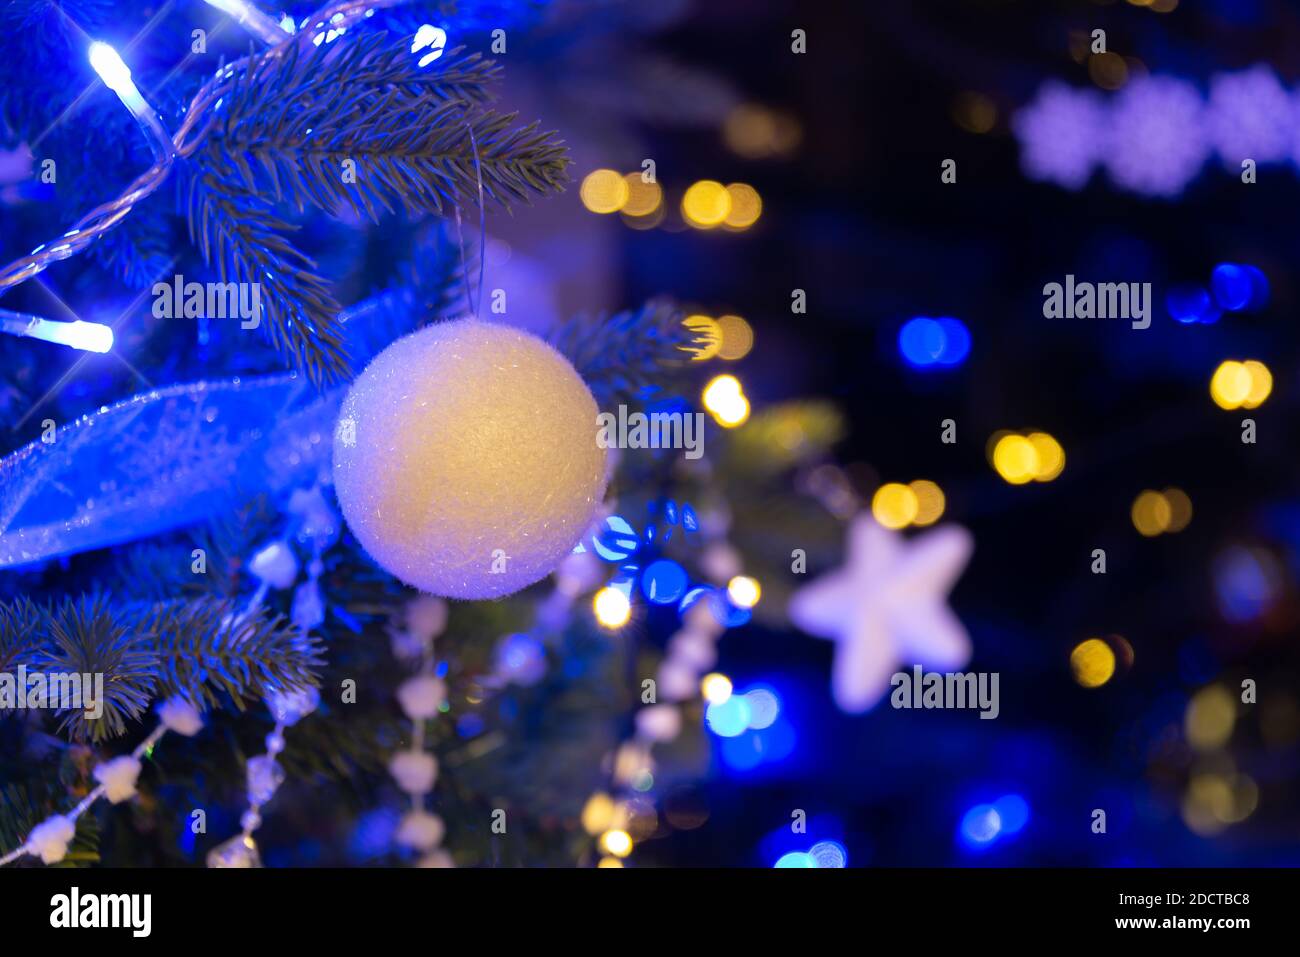 White ball hanging on a Christmas tree, Christmas ornaments at night, blue and gold holiday lights Stock Photo